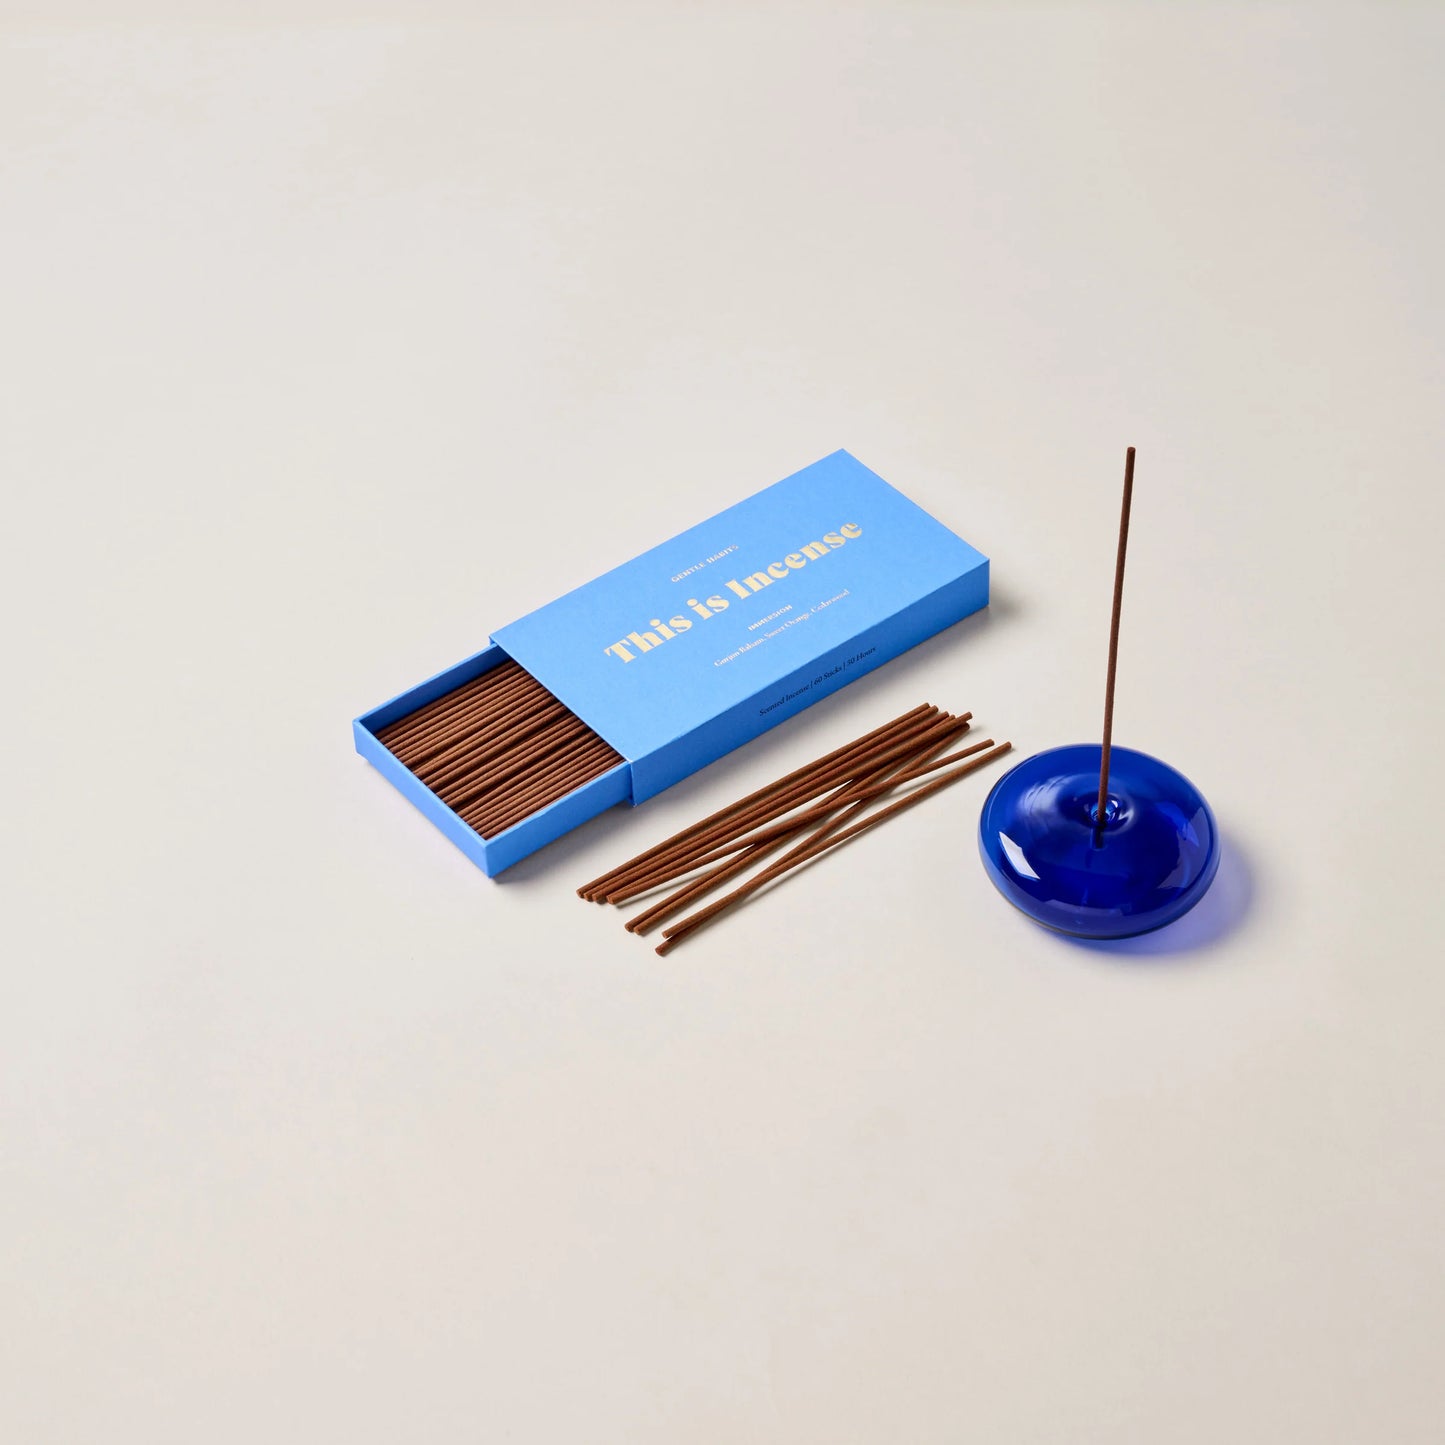 This is Incense - Immersion Incense